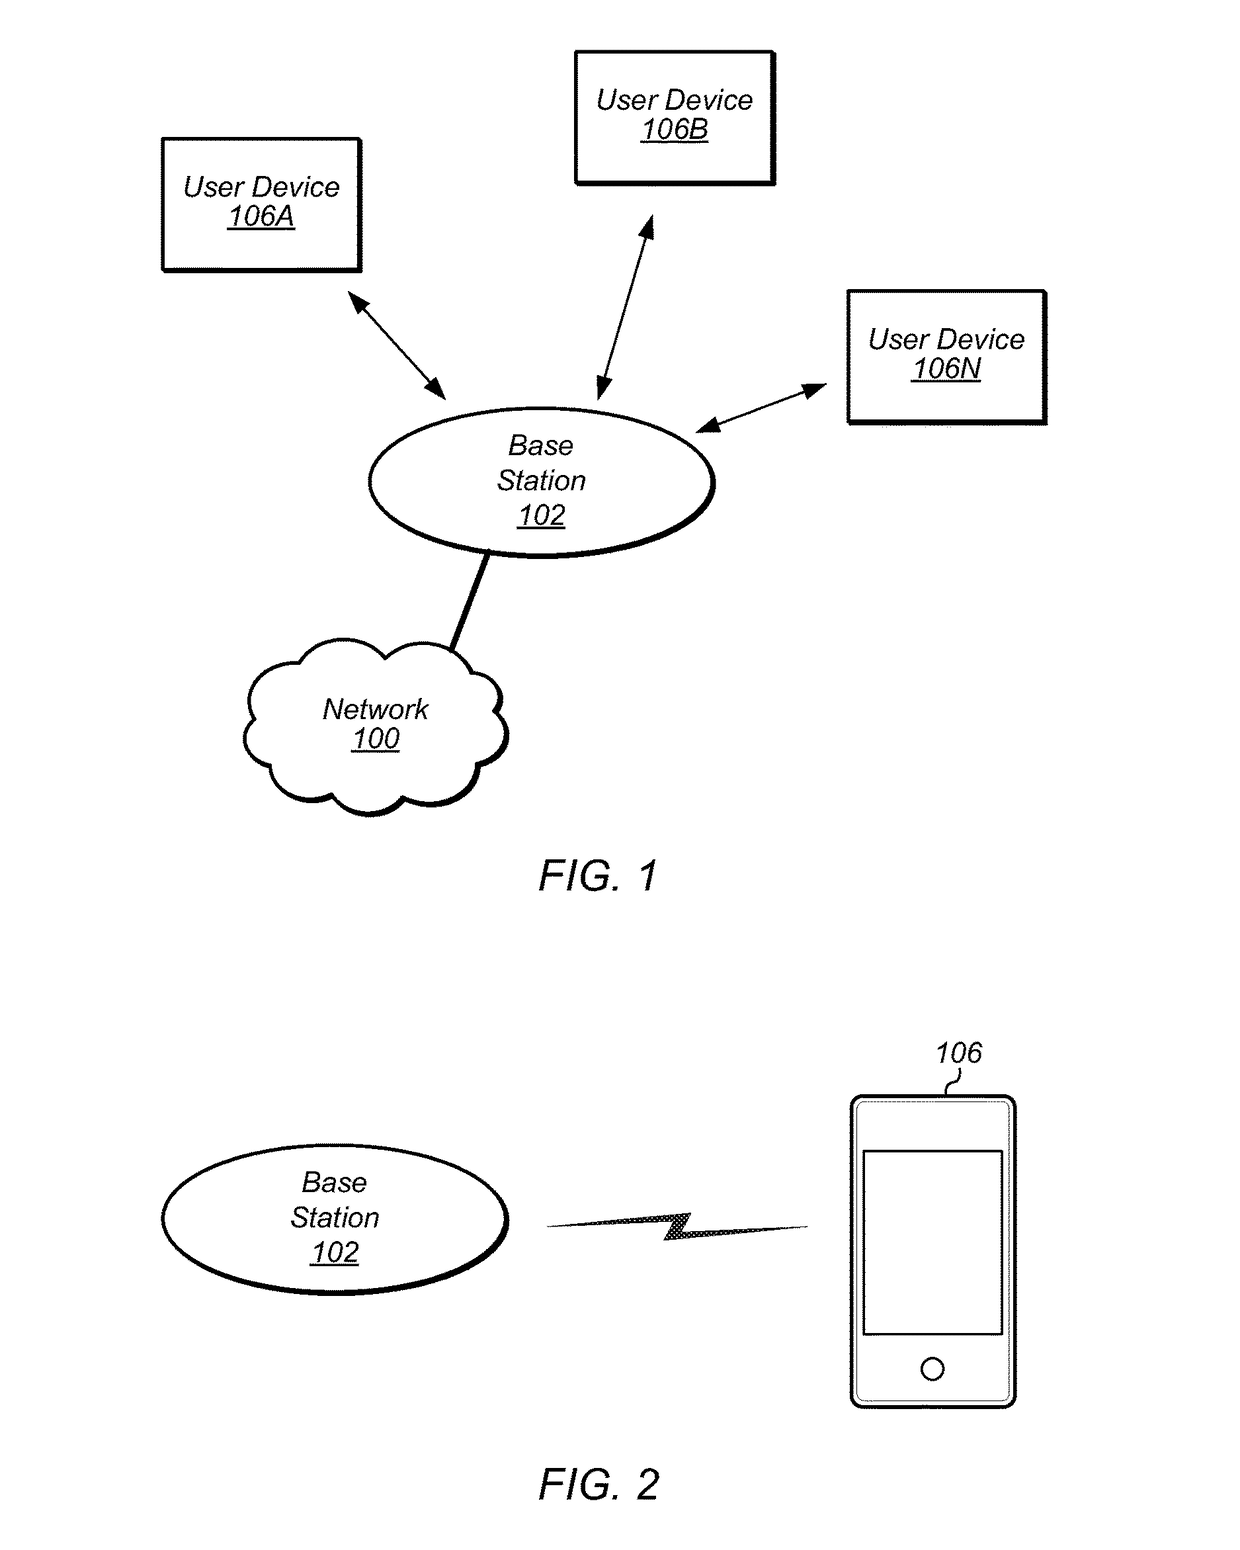 Location-based update of subscriber identity information in a wireless device